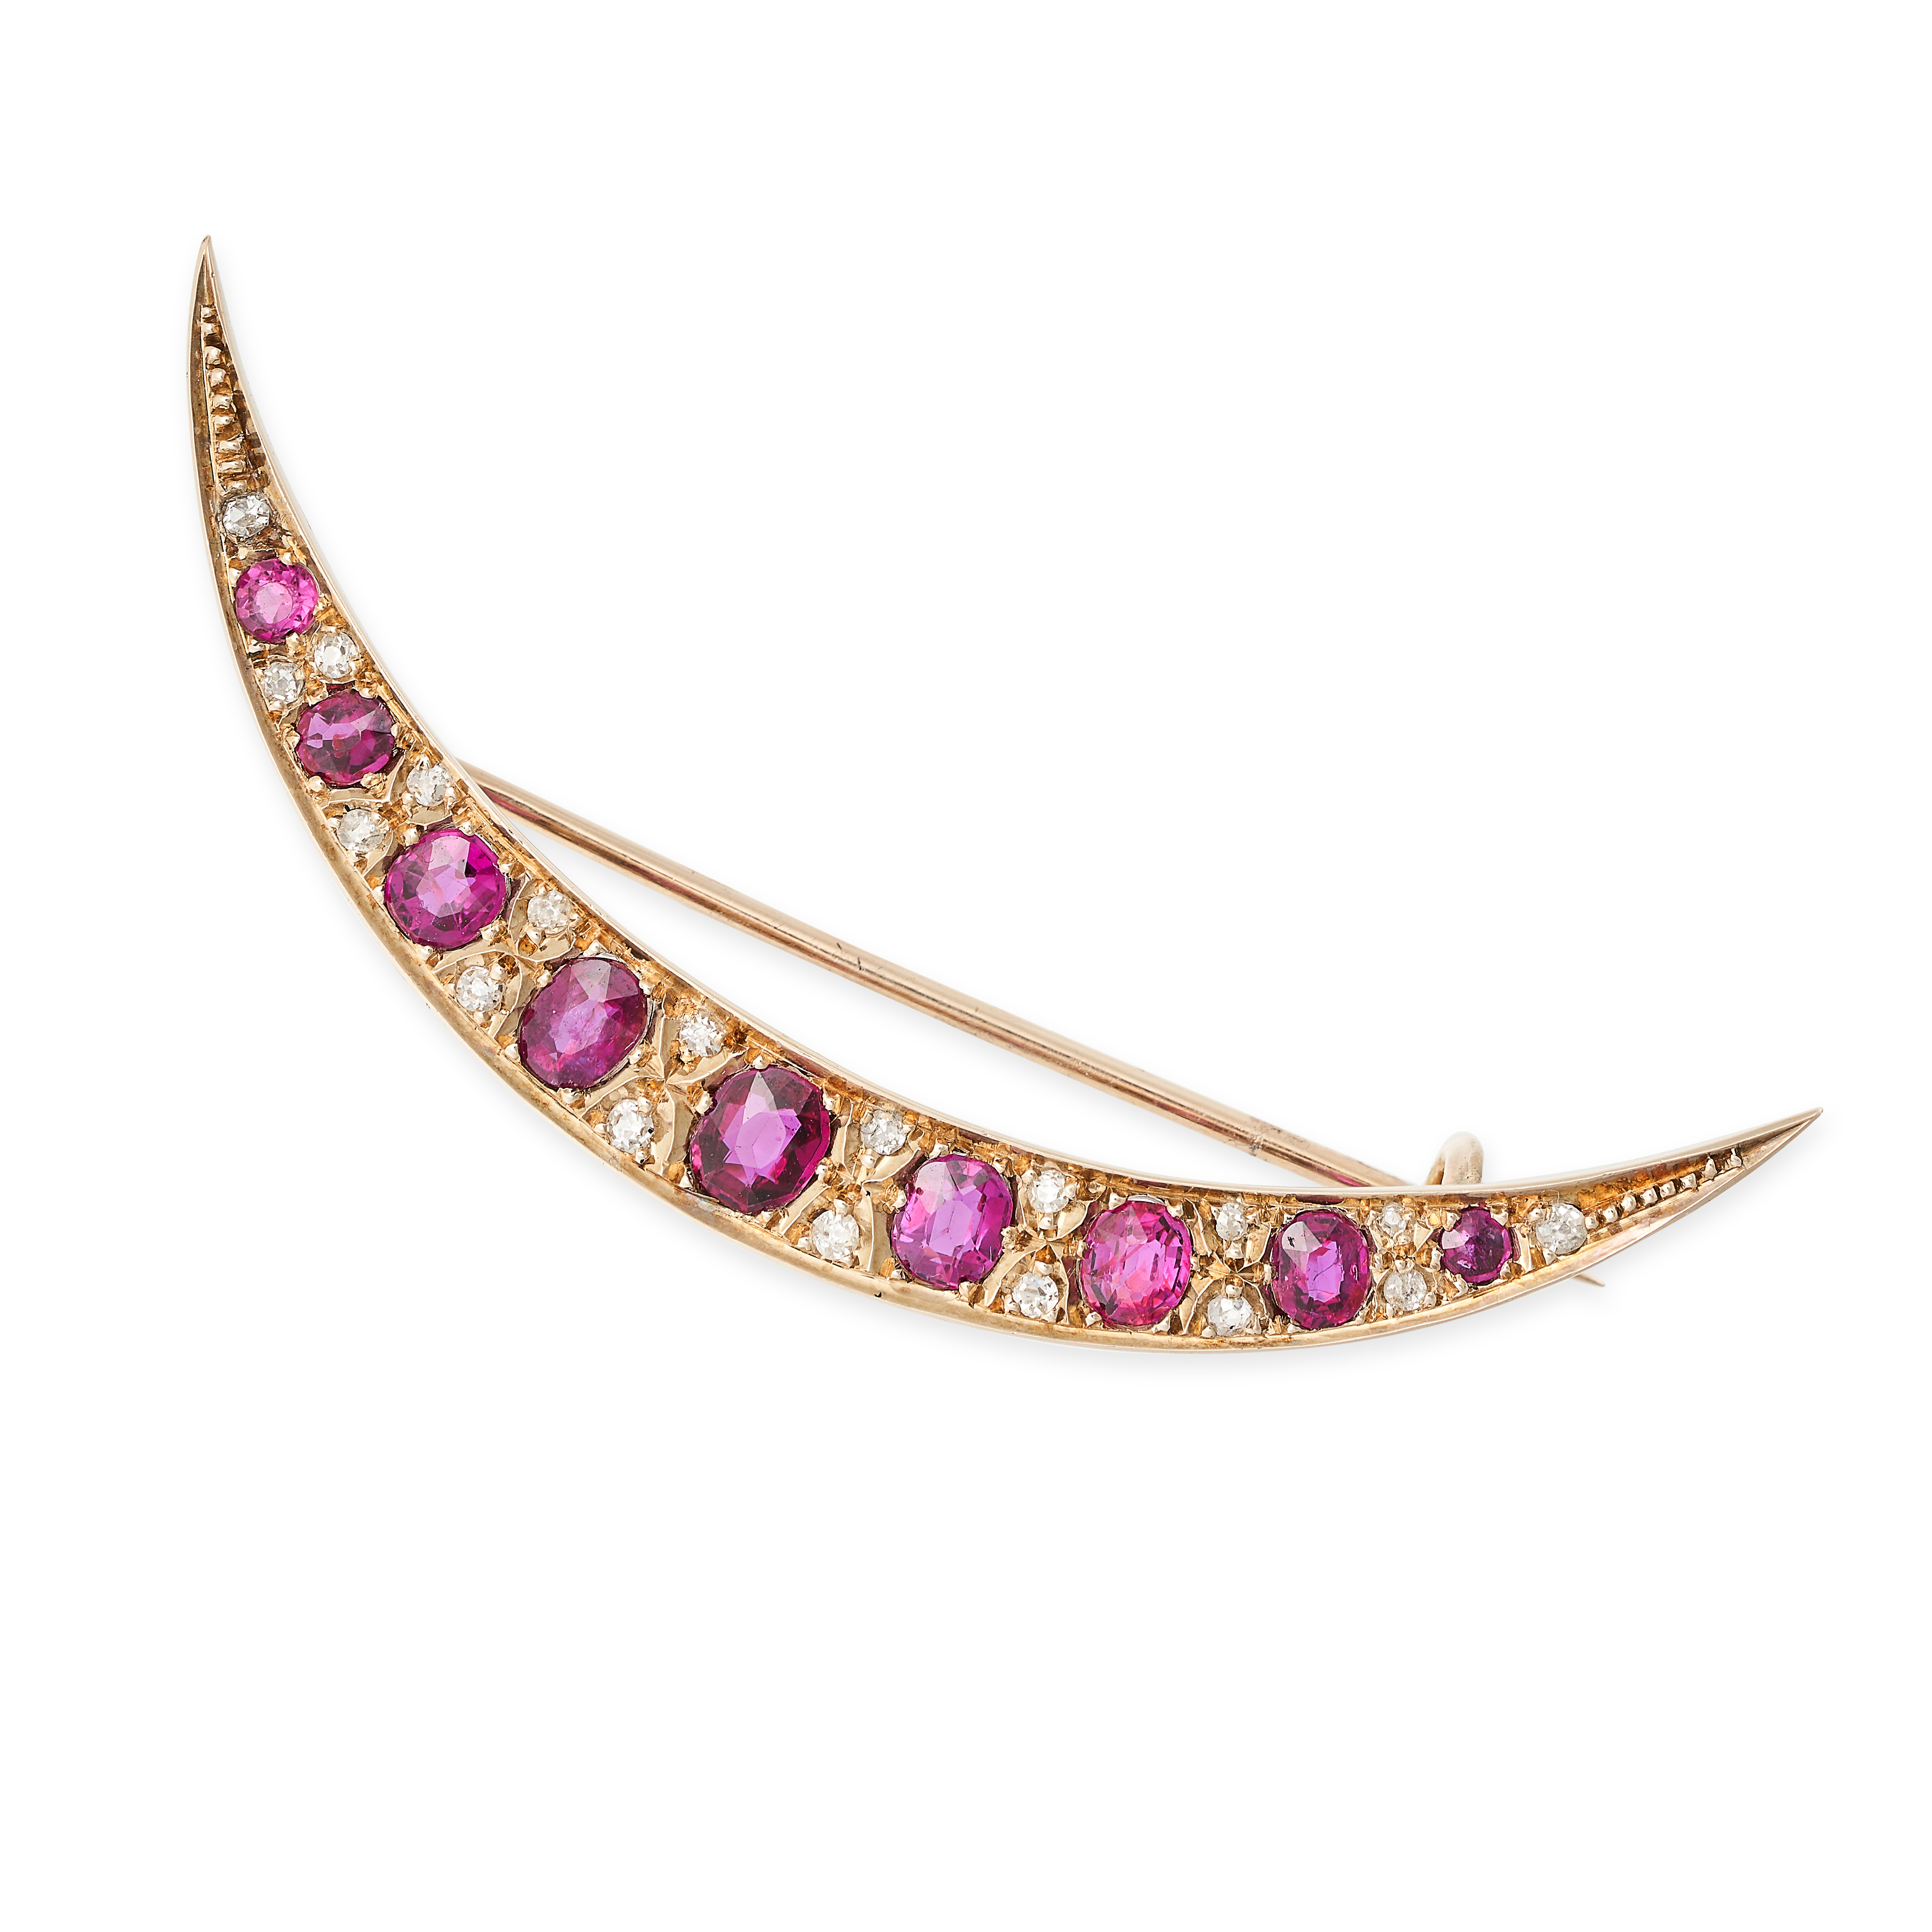 AN ANTIQUE VICTORIAN RUBY AND DIAMOND CRESCENT MOON BROOCH in yellow gold, set with round and